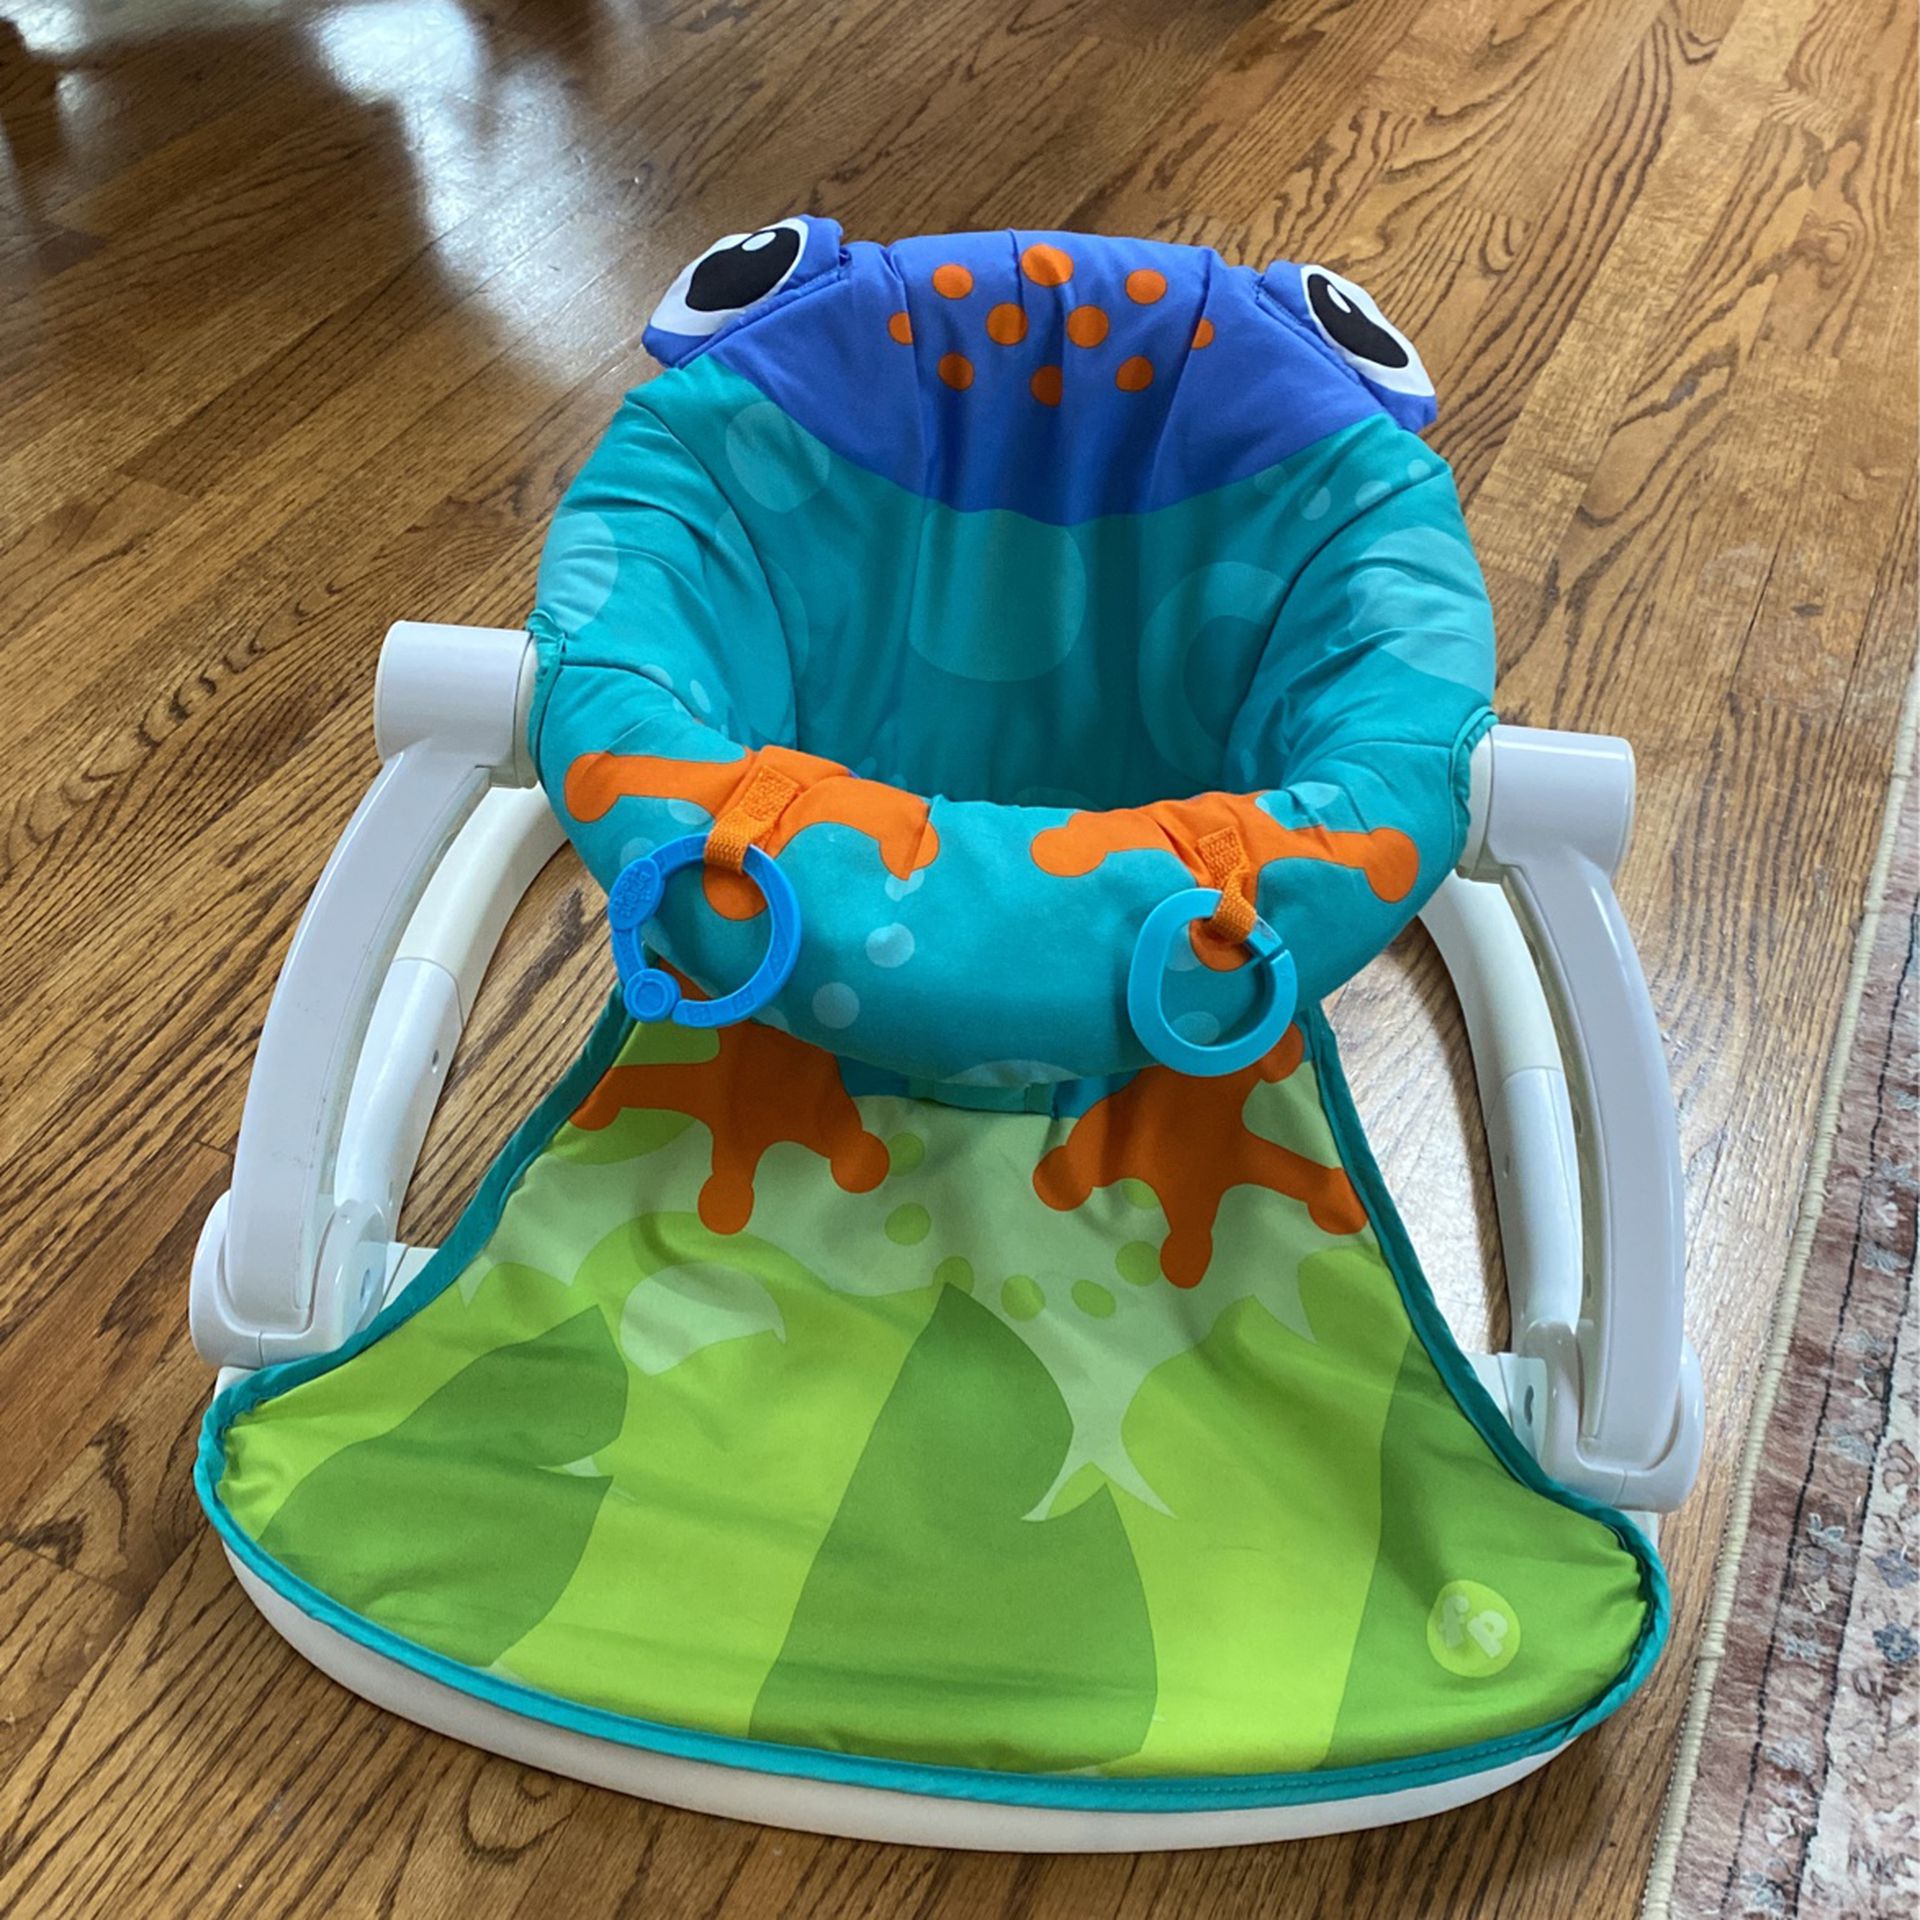 Baby Infant Seat - Stable Stain Free! 